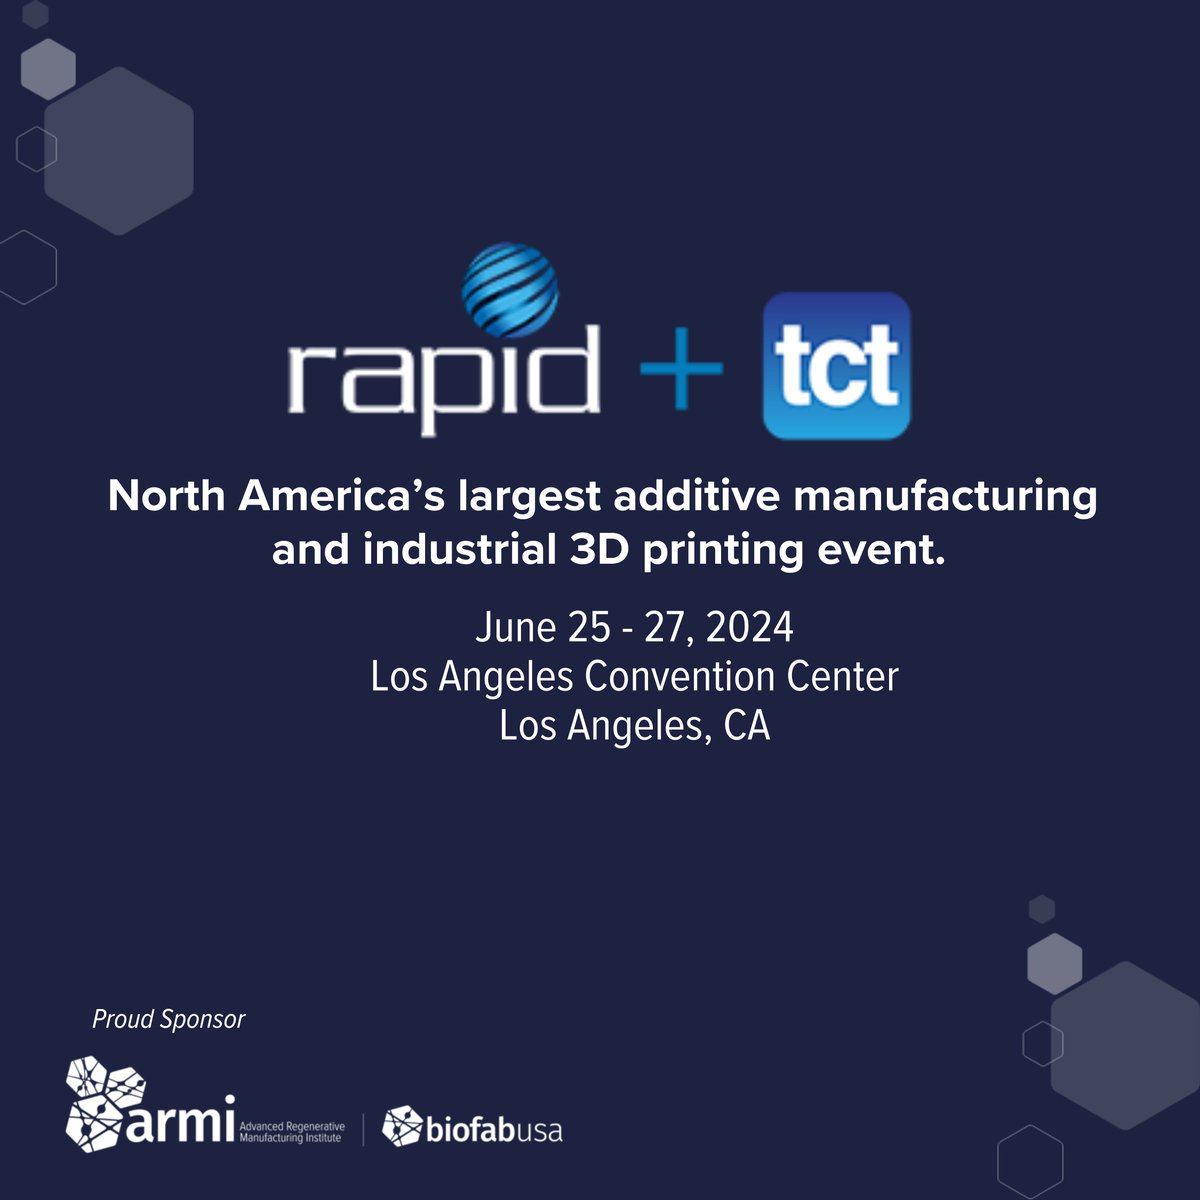 Join #ARMIBioFabUSA at the #RAPIDTCT Conference, North America's premier event for additive manufacturing and 3D printing, on June 25-27, 2024, in LA. Don't miss out on shaping the future of manufacturing! ow.ly/cxSZ50QAkpn #AdditiveManufacturing